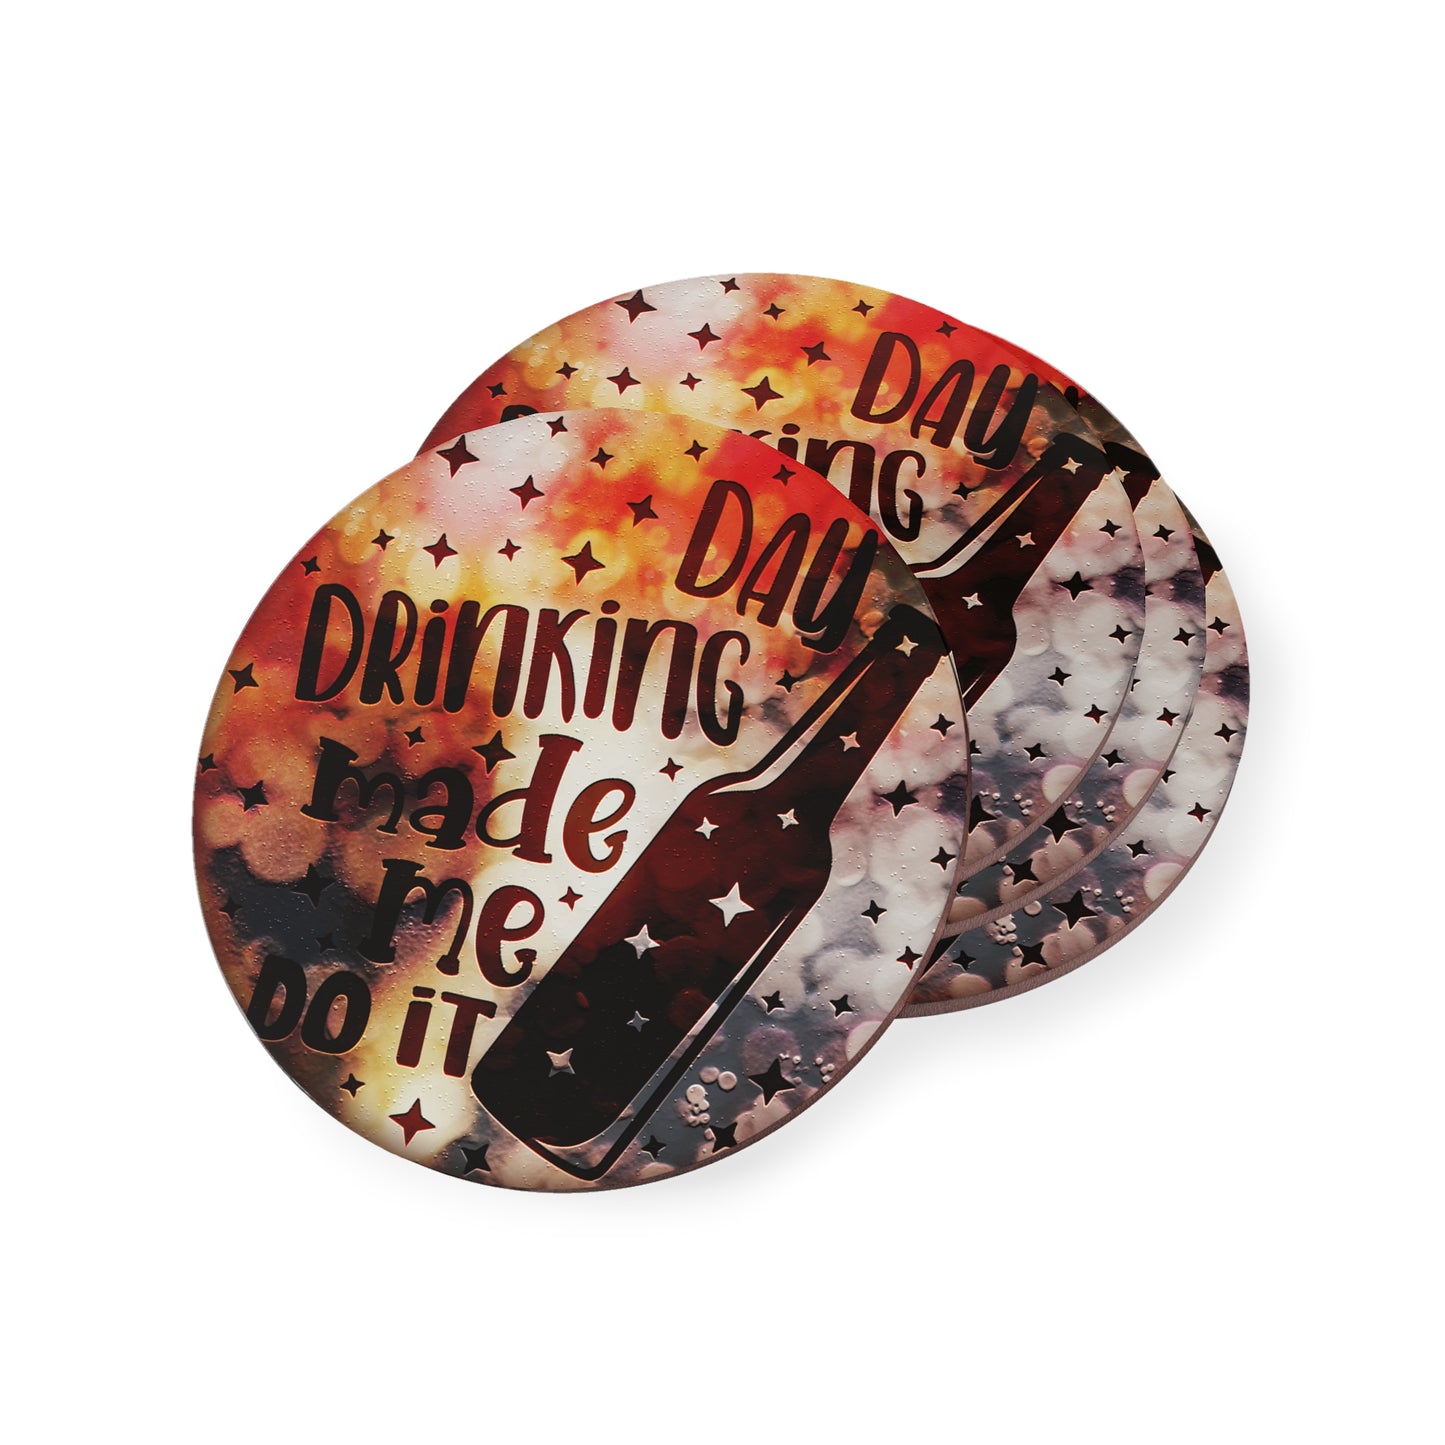 " Day Drinking Made Me Do It " Round Coasters